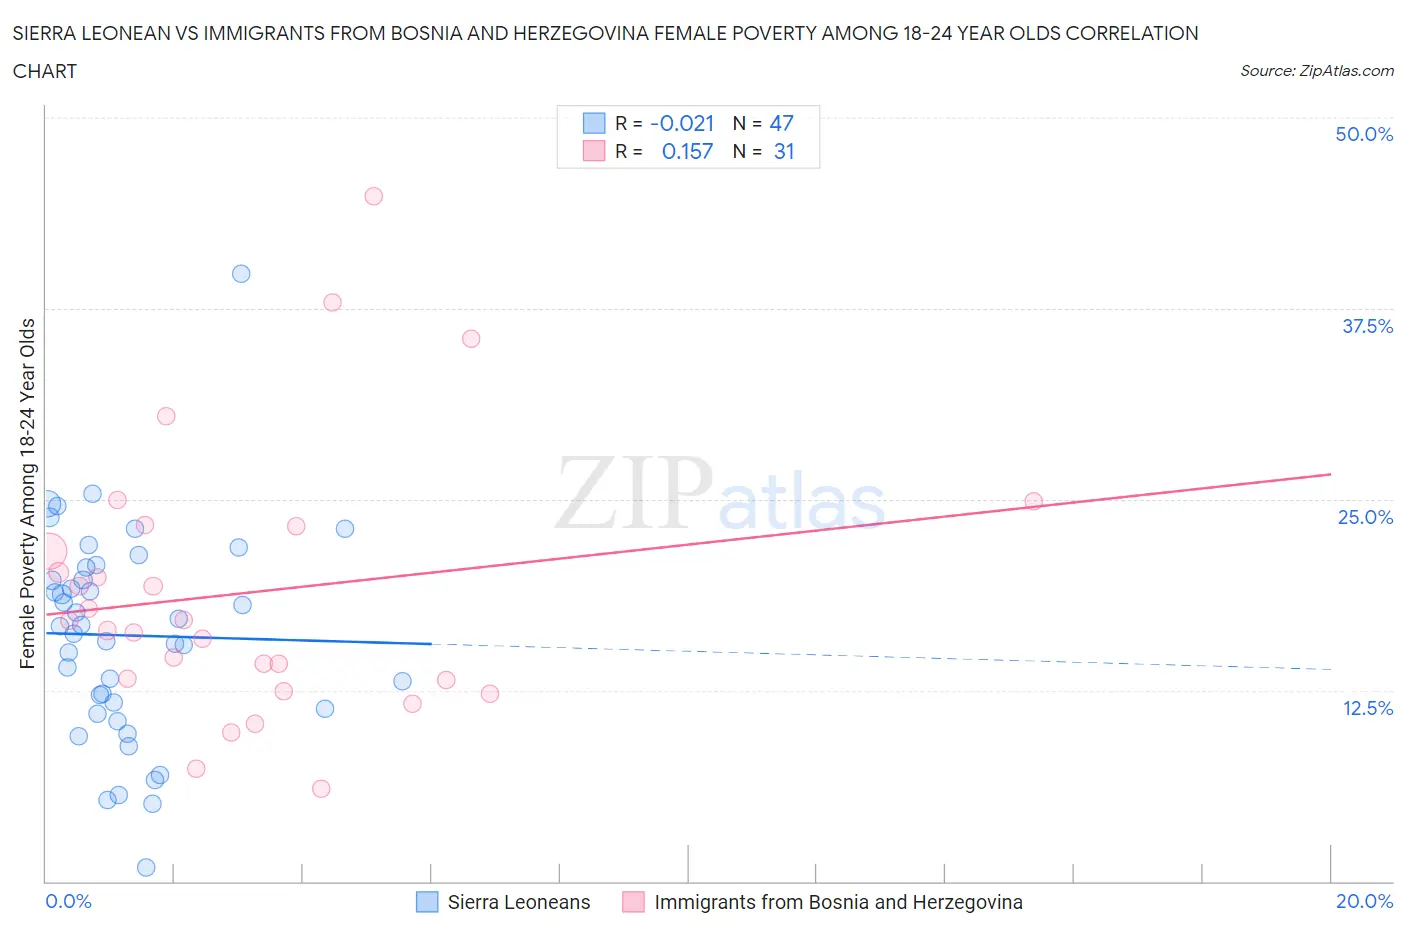 Sierra Leonean vs Immigrants from Bosnia and Herzegovina Female Poverty Among 18-24 Year Olds